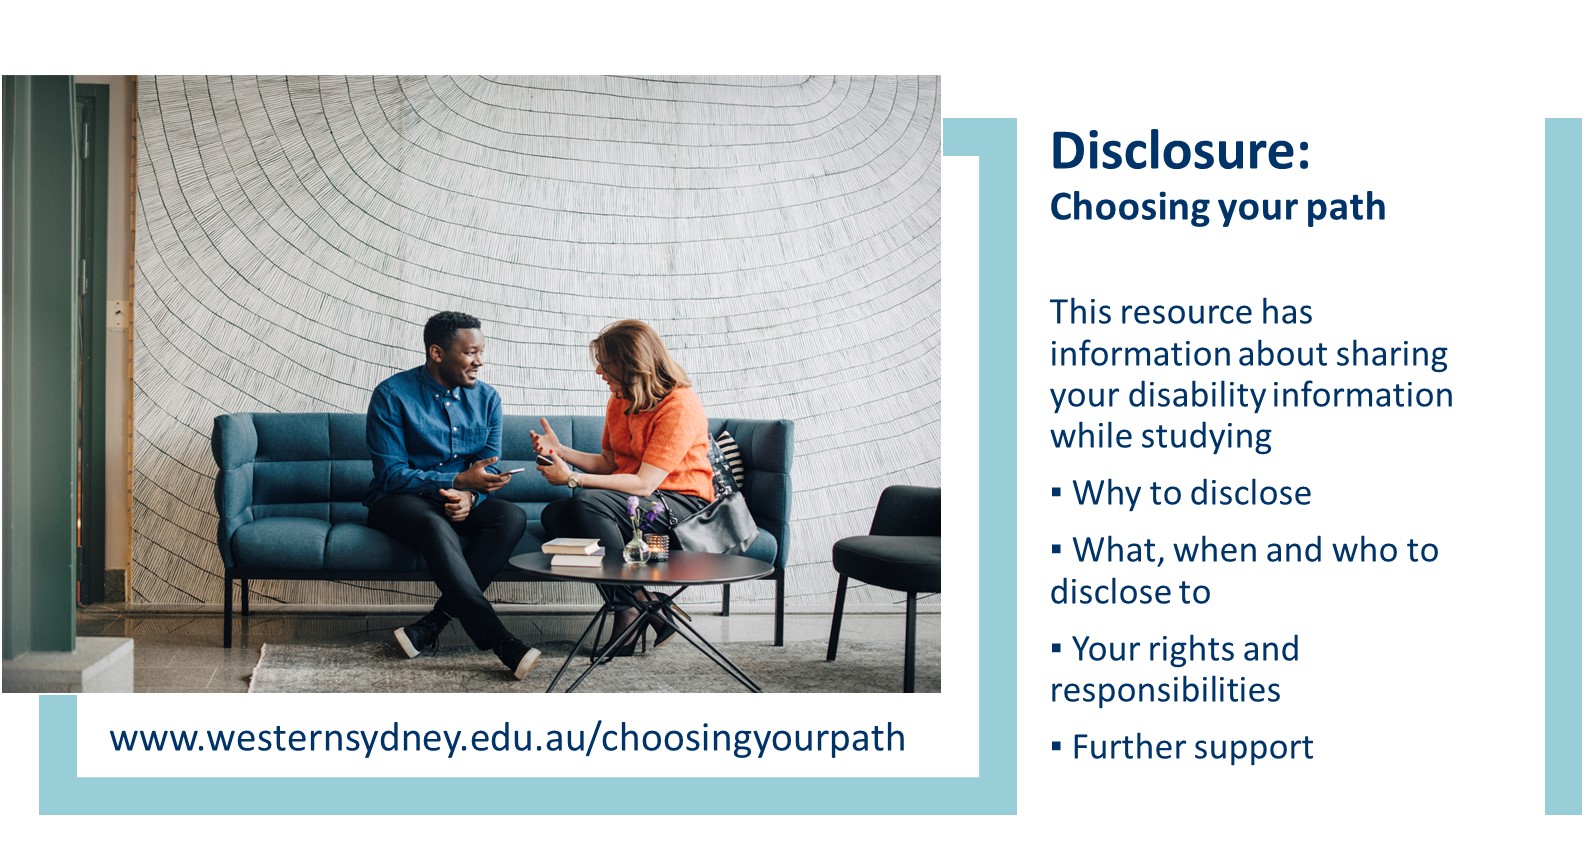 Disclosure - choosing your path is a resource developed to assist students with sharing information about their disability needs while studying or working